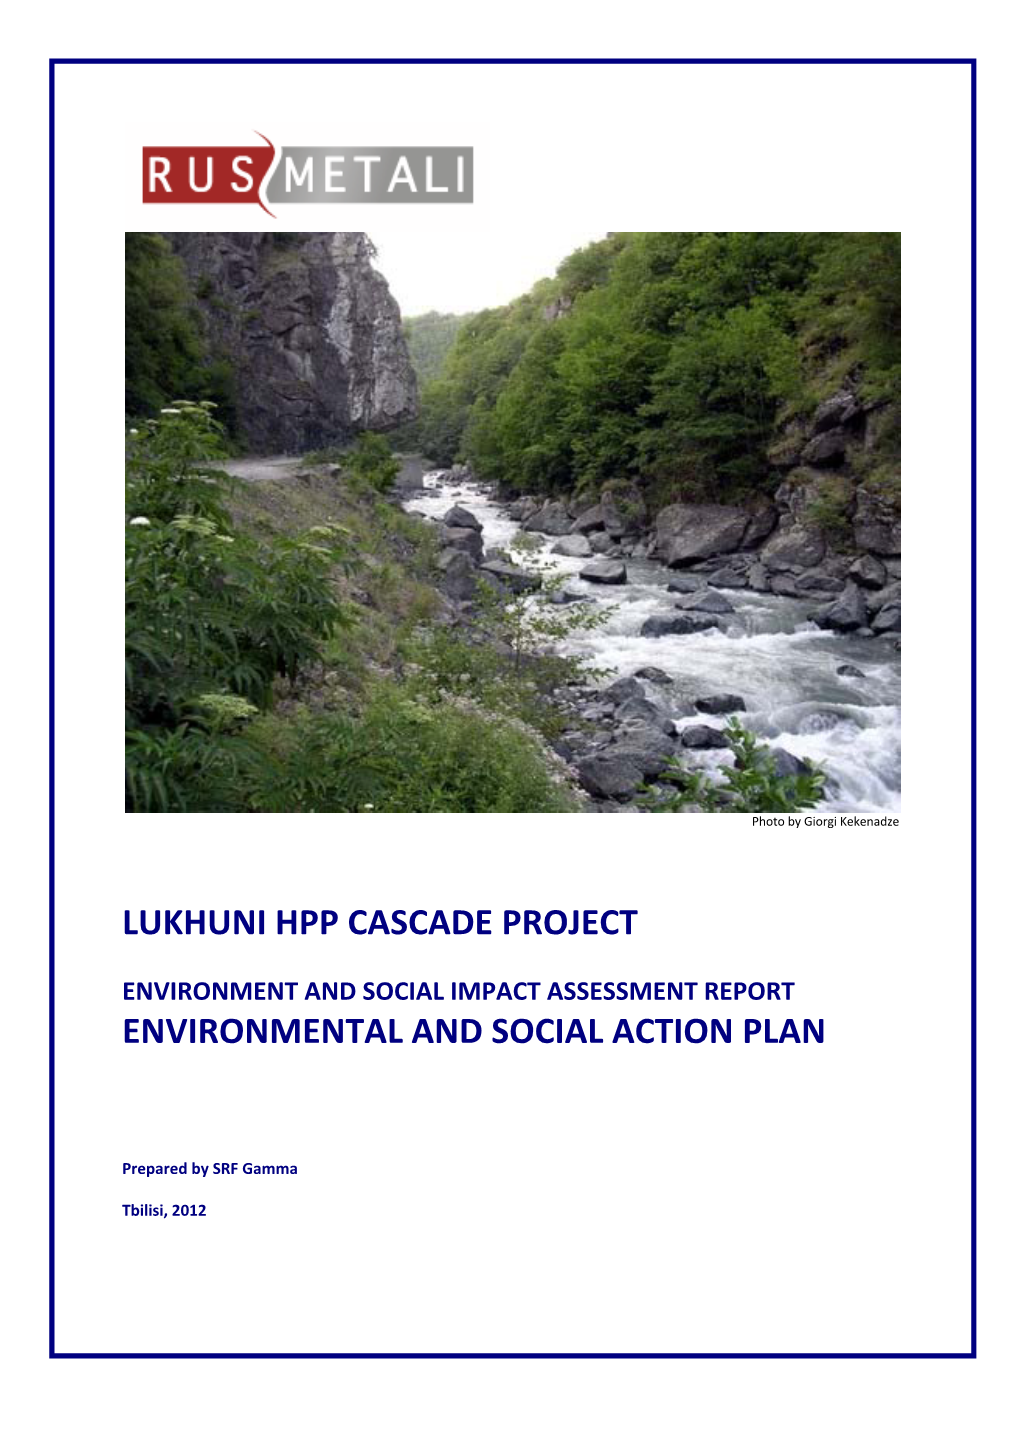 Lukhuni Hpp Cascade Project Environmental and Social